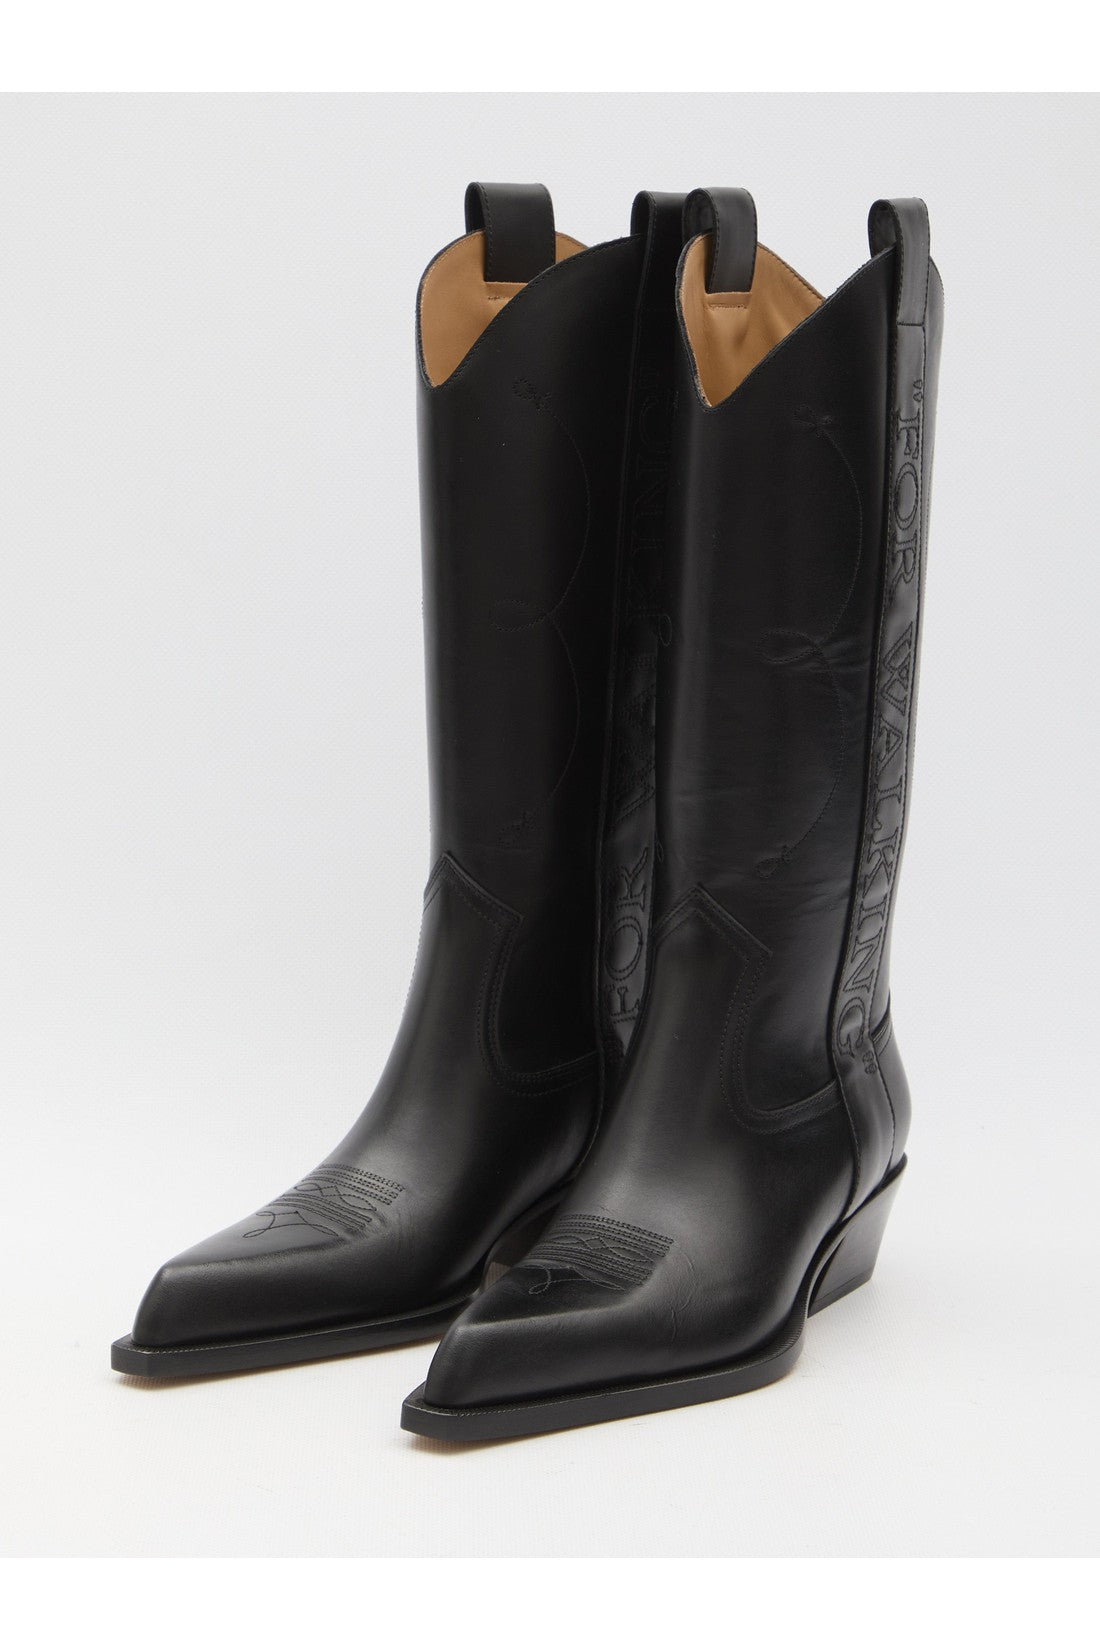 OFF-WHITE-OUTLET-SALE-For-Walking-Texan-boots-Stiefel-Stiefeletten-ARCHIVE-COLLECTION-2.jpg